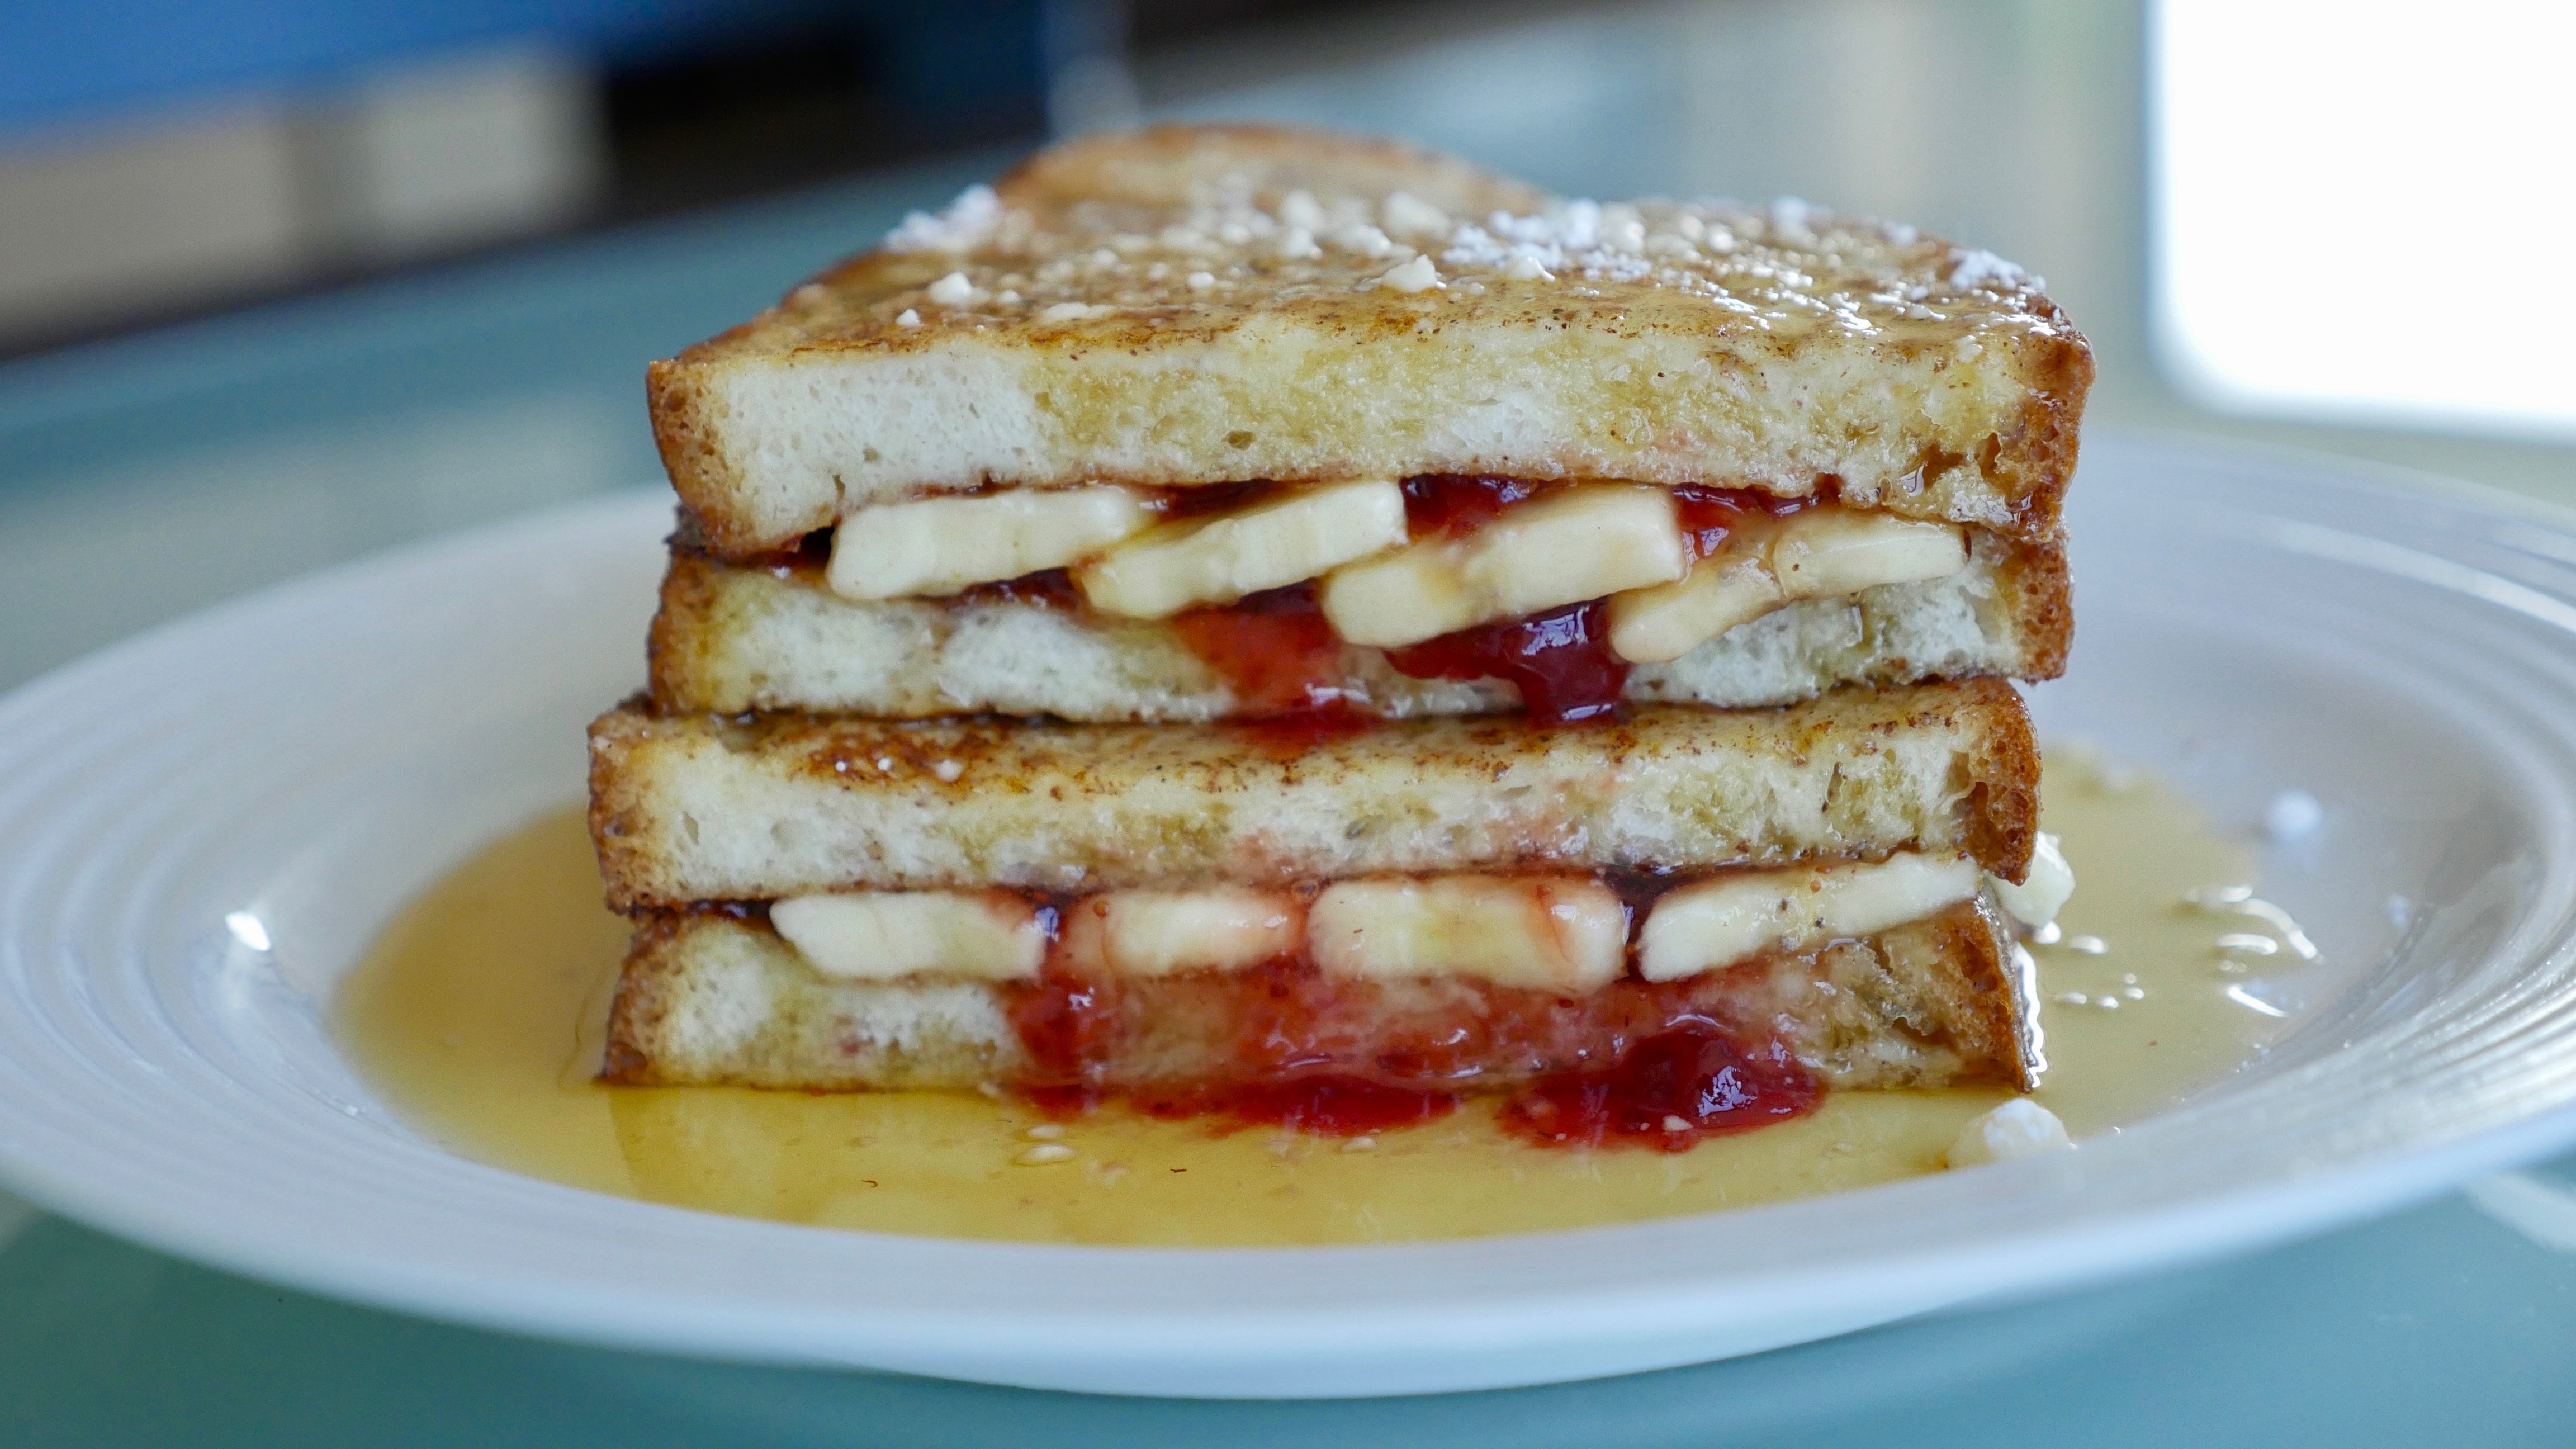 French Toast Sandwich with Bananas and Jam - Turano Baking Co.